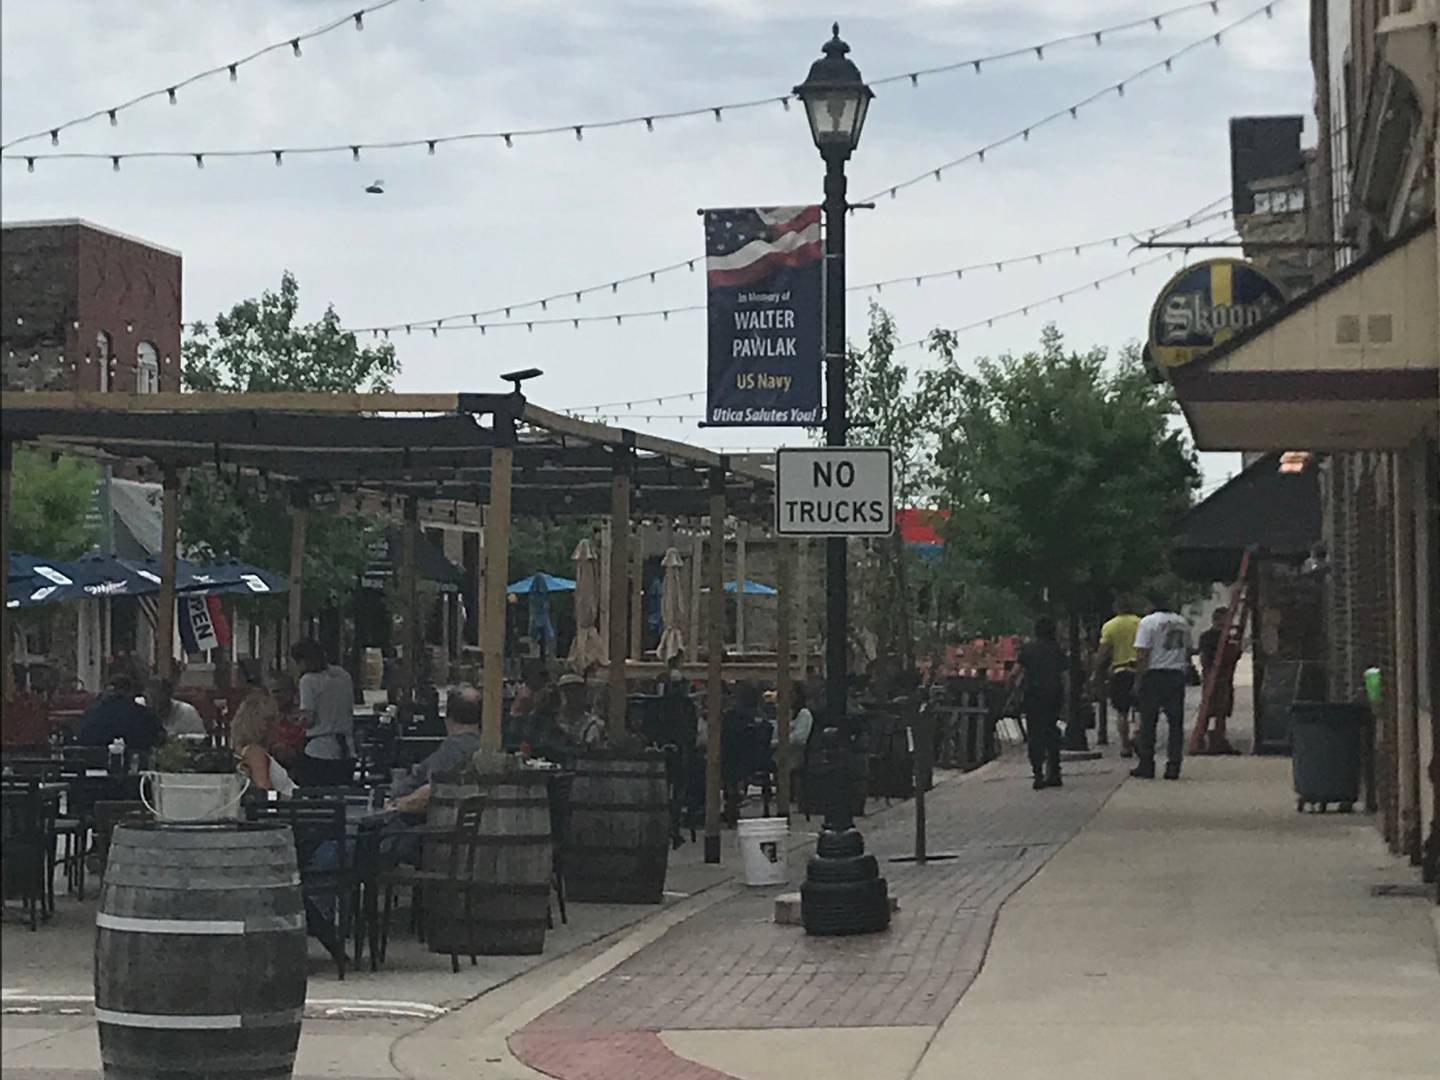 Outdoor dining has been a popular addition in Utica, and Skoog's Pub & Grill is among the village eateries that lets diners enjoy meals on a cordoned-off portion of Mill Street.